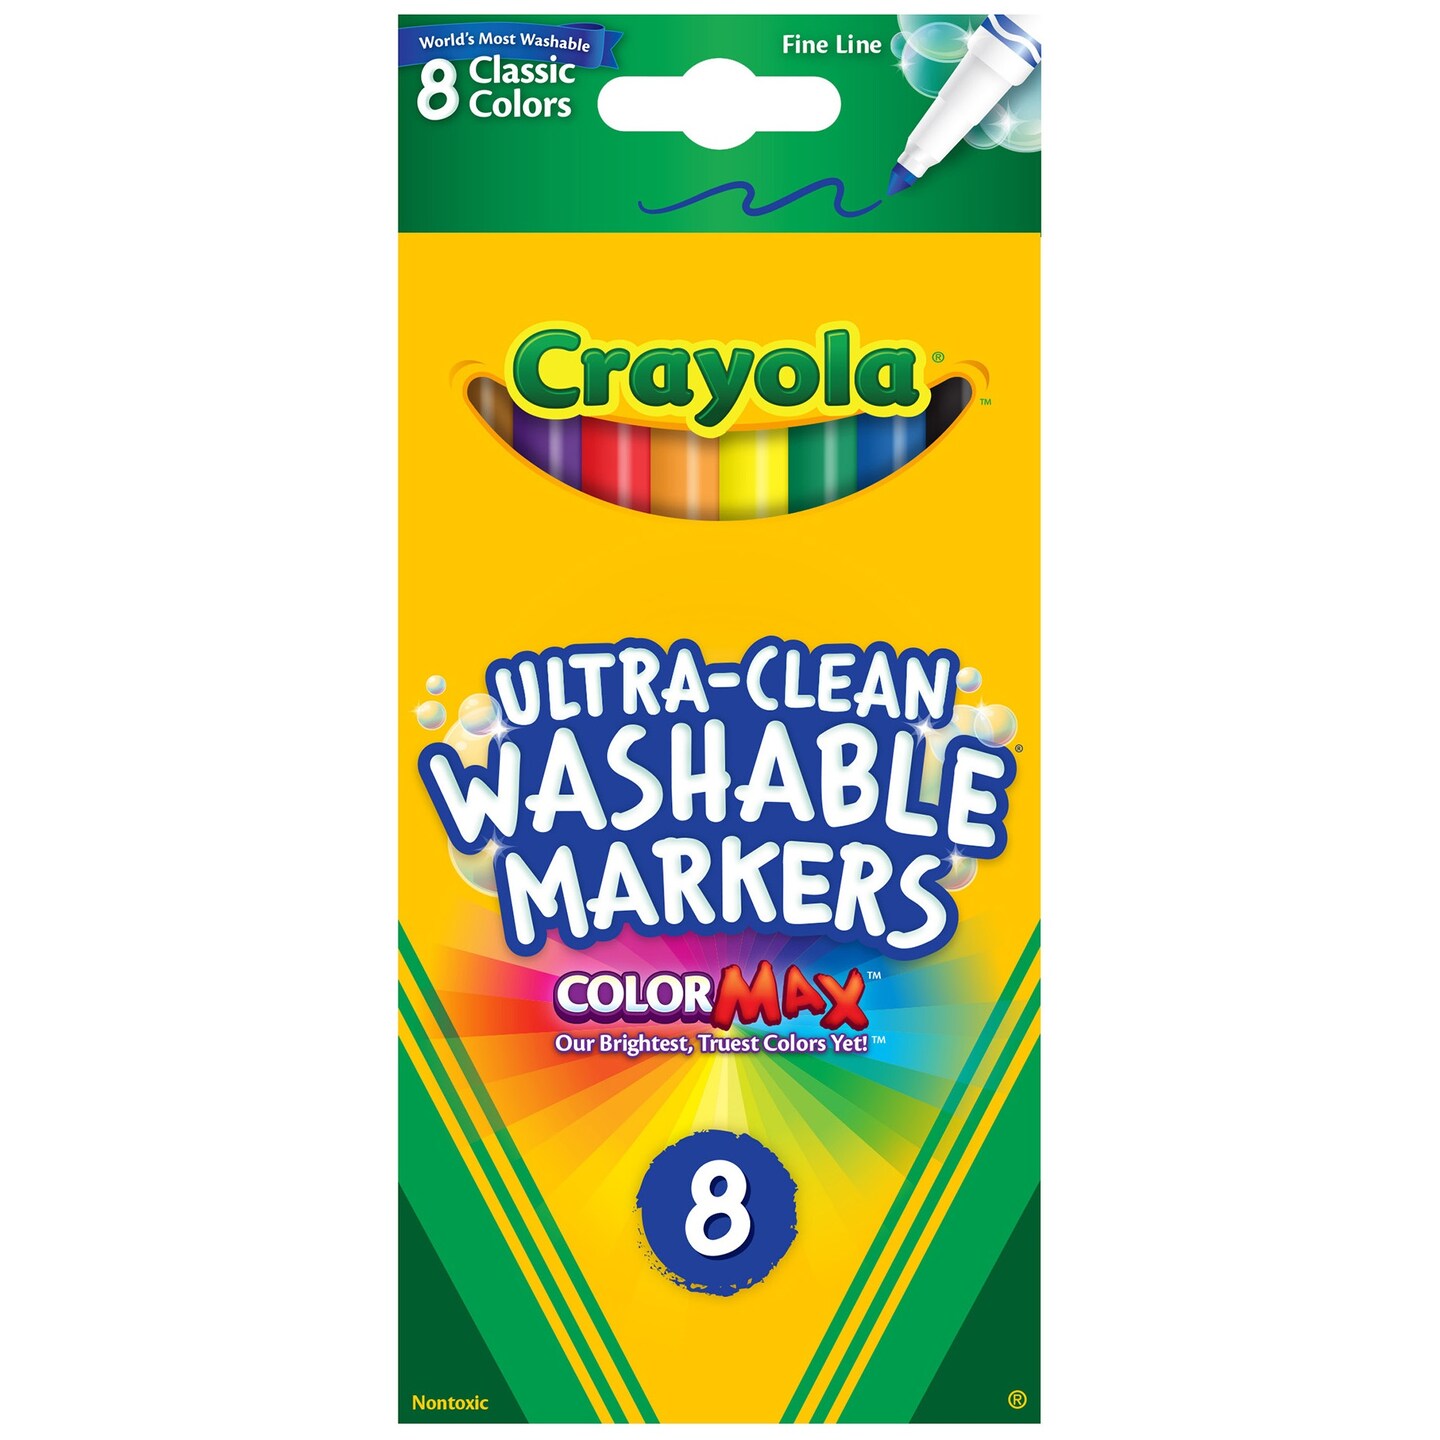 Crayola Ultra-Clean Color Max Fine Washable Markers 8/Pkg-Classic Colors